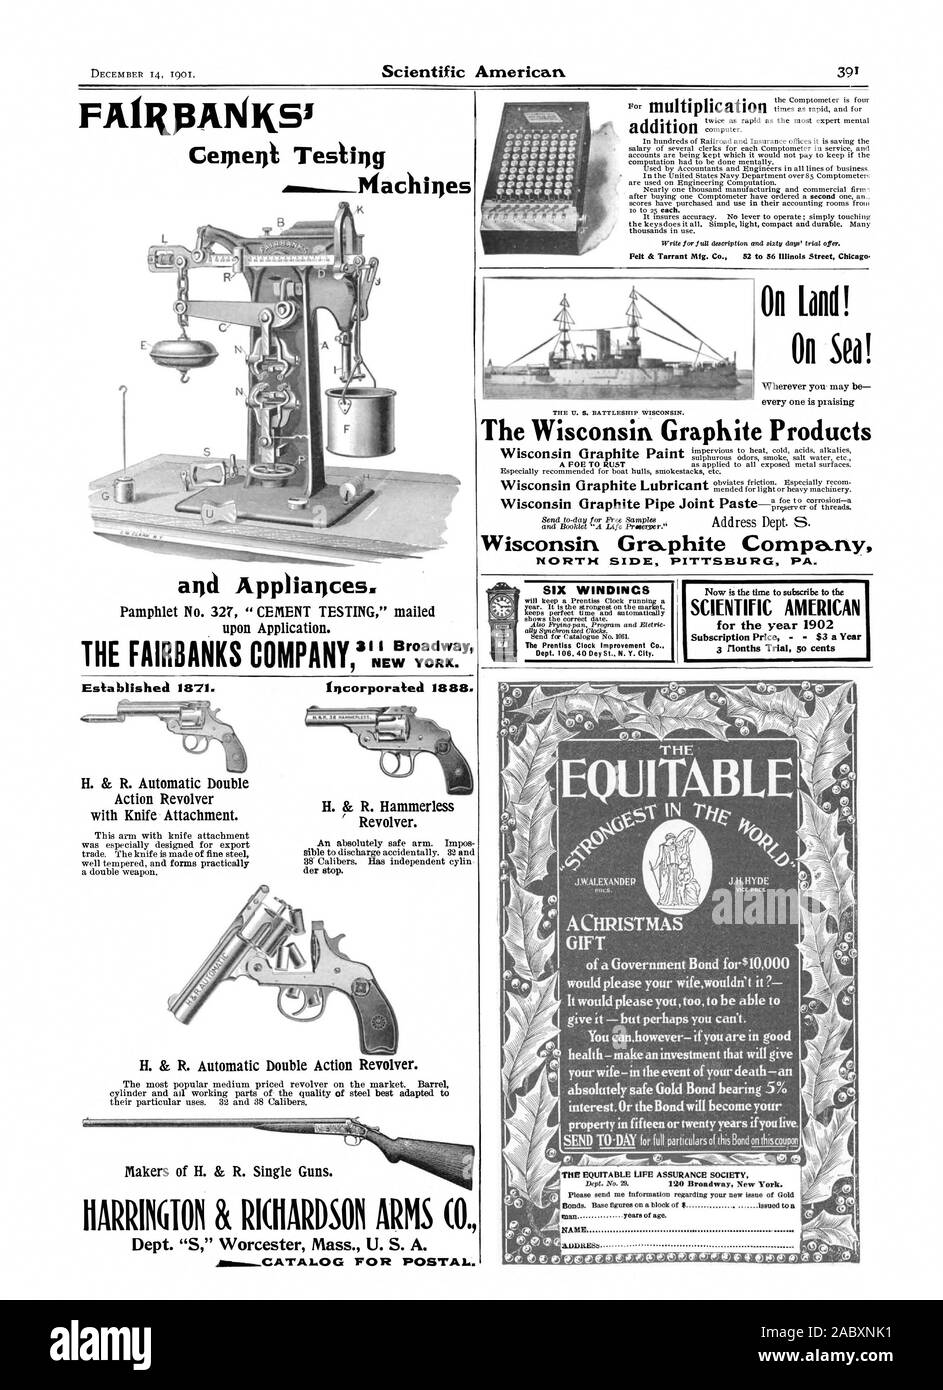 Cement Testing awl Appliances Pamphlet No. 327 'CEMENT TESTING' mailed upon Application. Felt & Tarrant Mfg. Co. 52 to 56 Illinois Street Chicago. THE U. S. BATTLESHIP WISCONSIN The Wisconsin Graphite Products Wisconsin Graphite Company for the year 1902 Subscription Price  $3 a Year SIXWINDINGS Dept. 10640 Dey St. N. Y. City. IPOWIPPVIPP wwiroirip rip elpipwc ° On Land! On Sea! Action Revolver with Knife Attachment. Revolver. Urfa H. & R. Automatic Double Action Revolver. HARRINGTON 8( RICHARDSON ARMS (0. Dept. 'S' Worcester Mass. U. S. A. Ar--CATALOG FOR POSTAL. ACHRISTMAS GIFT of a Stock Photo